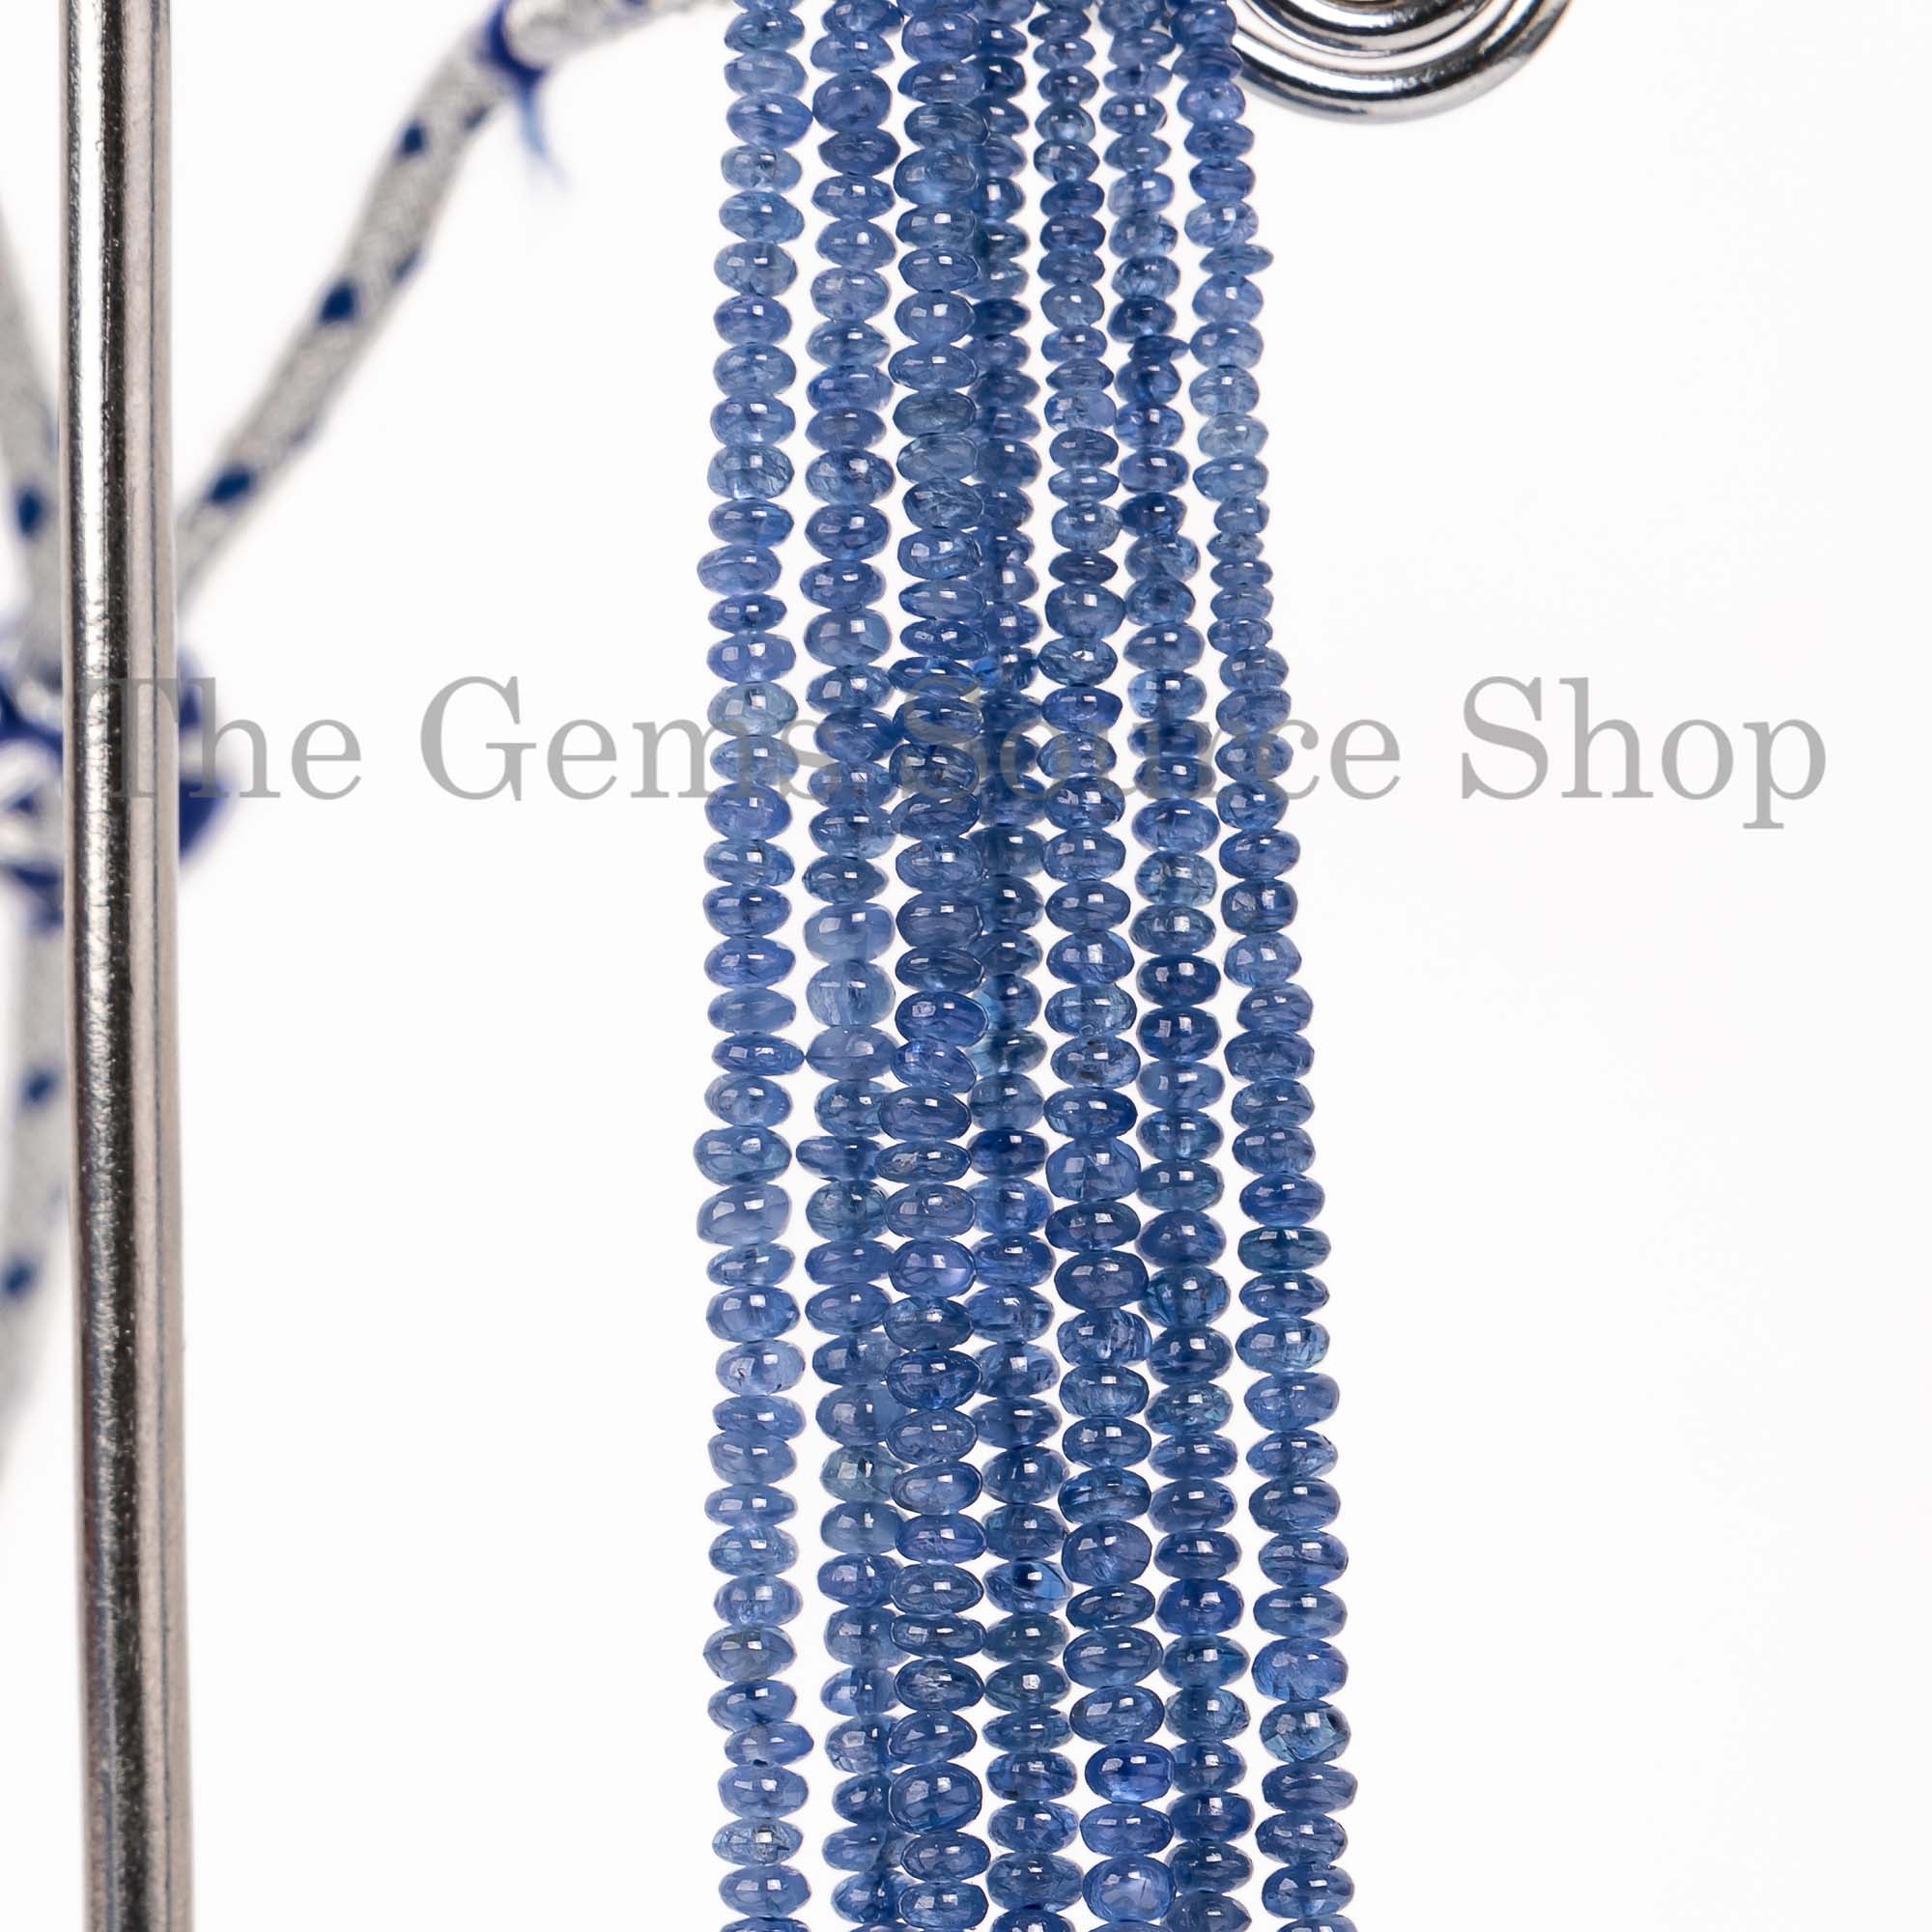 Blue Sapphire Burmese Beads Necklace, Blue Sapphire Smooth Rondelle Beads Necklace, Gemstone Jewelry